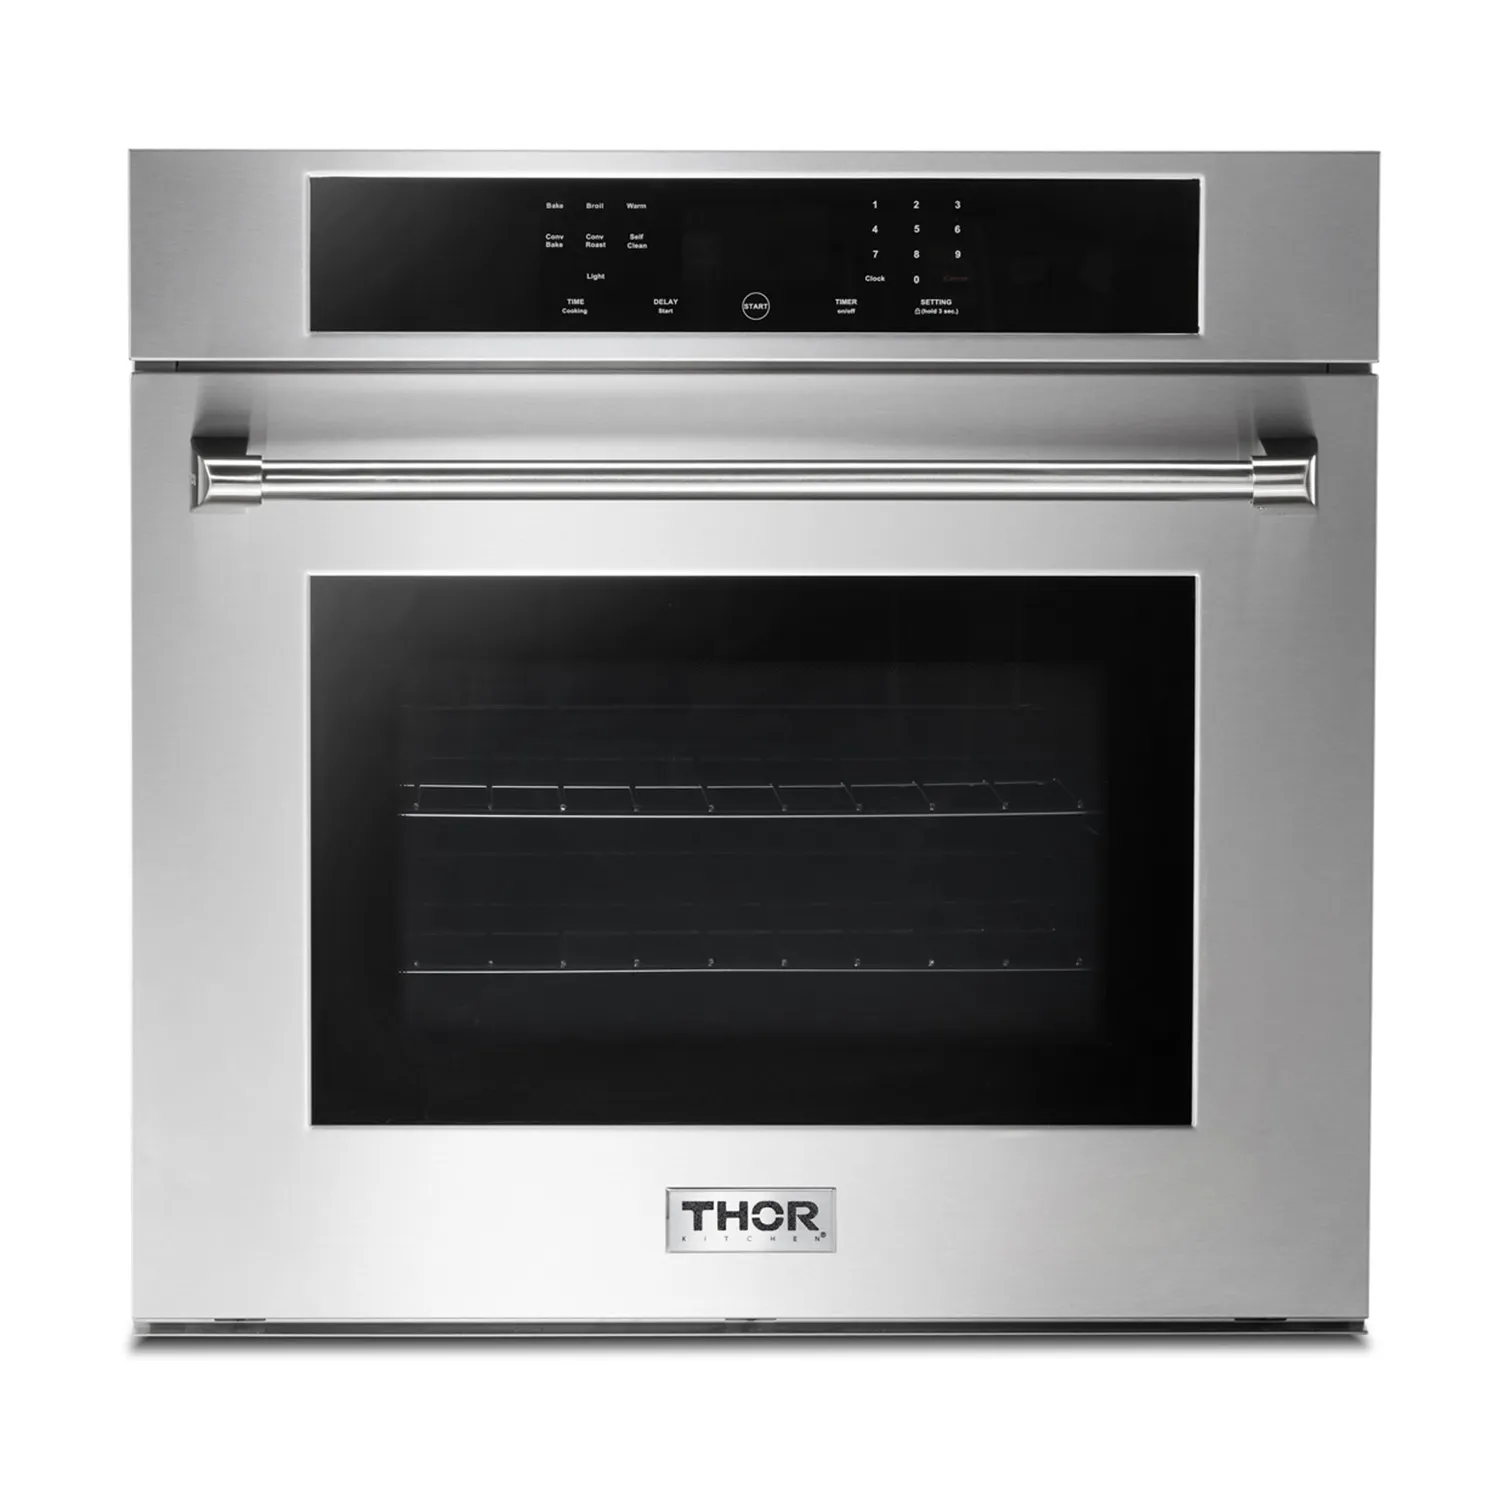 THOR 30" SELF CLEANING WALL OVEN